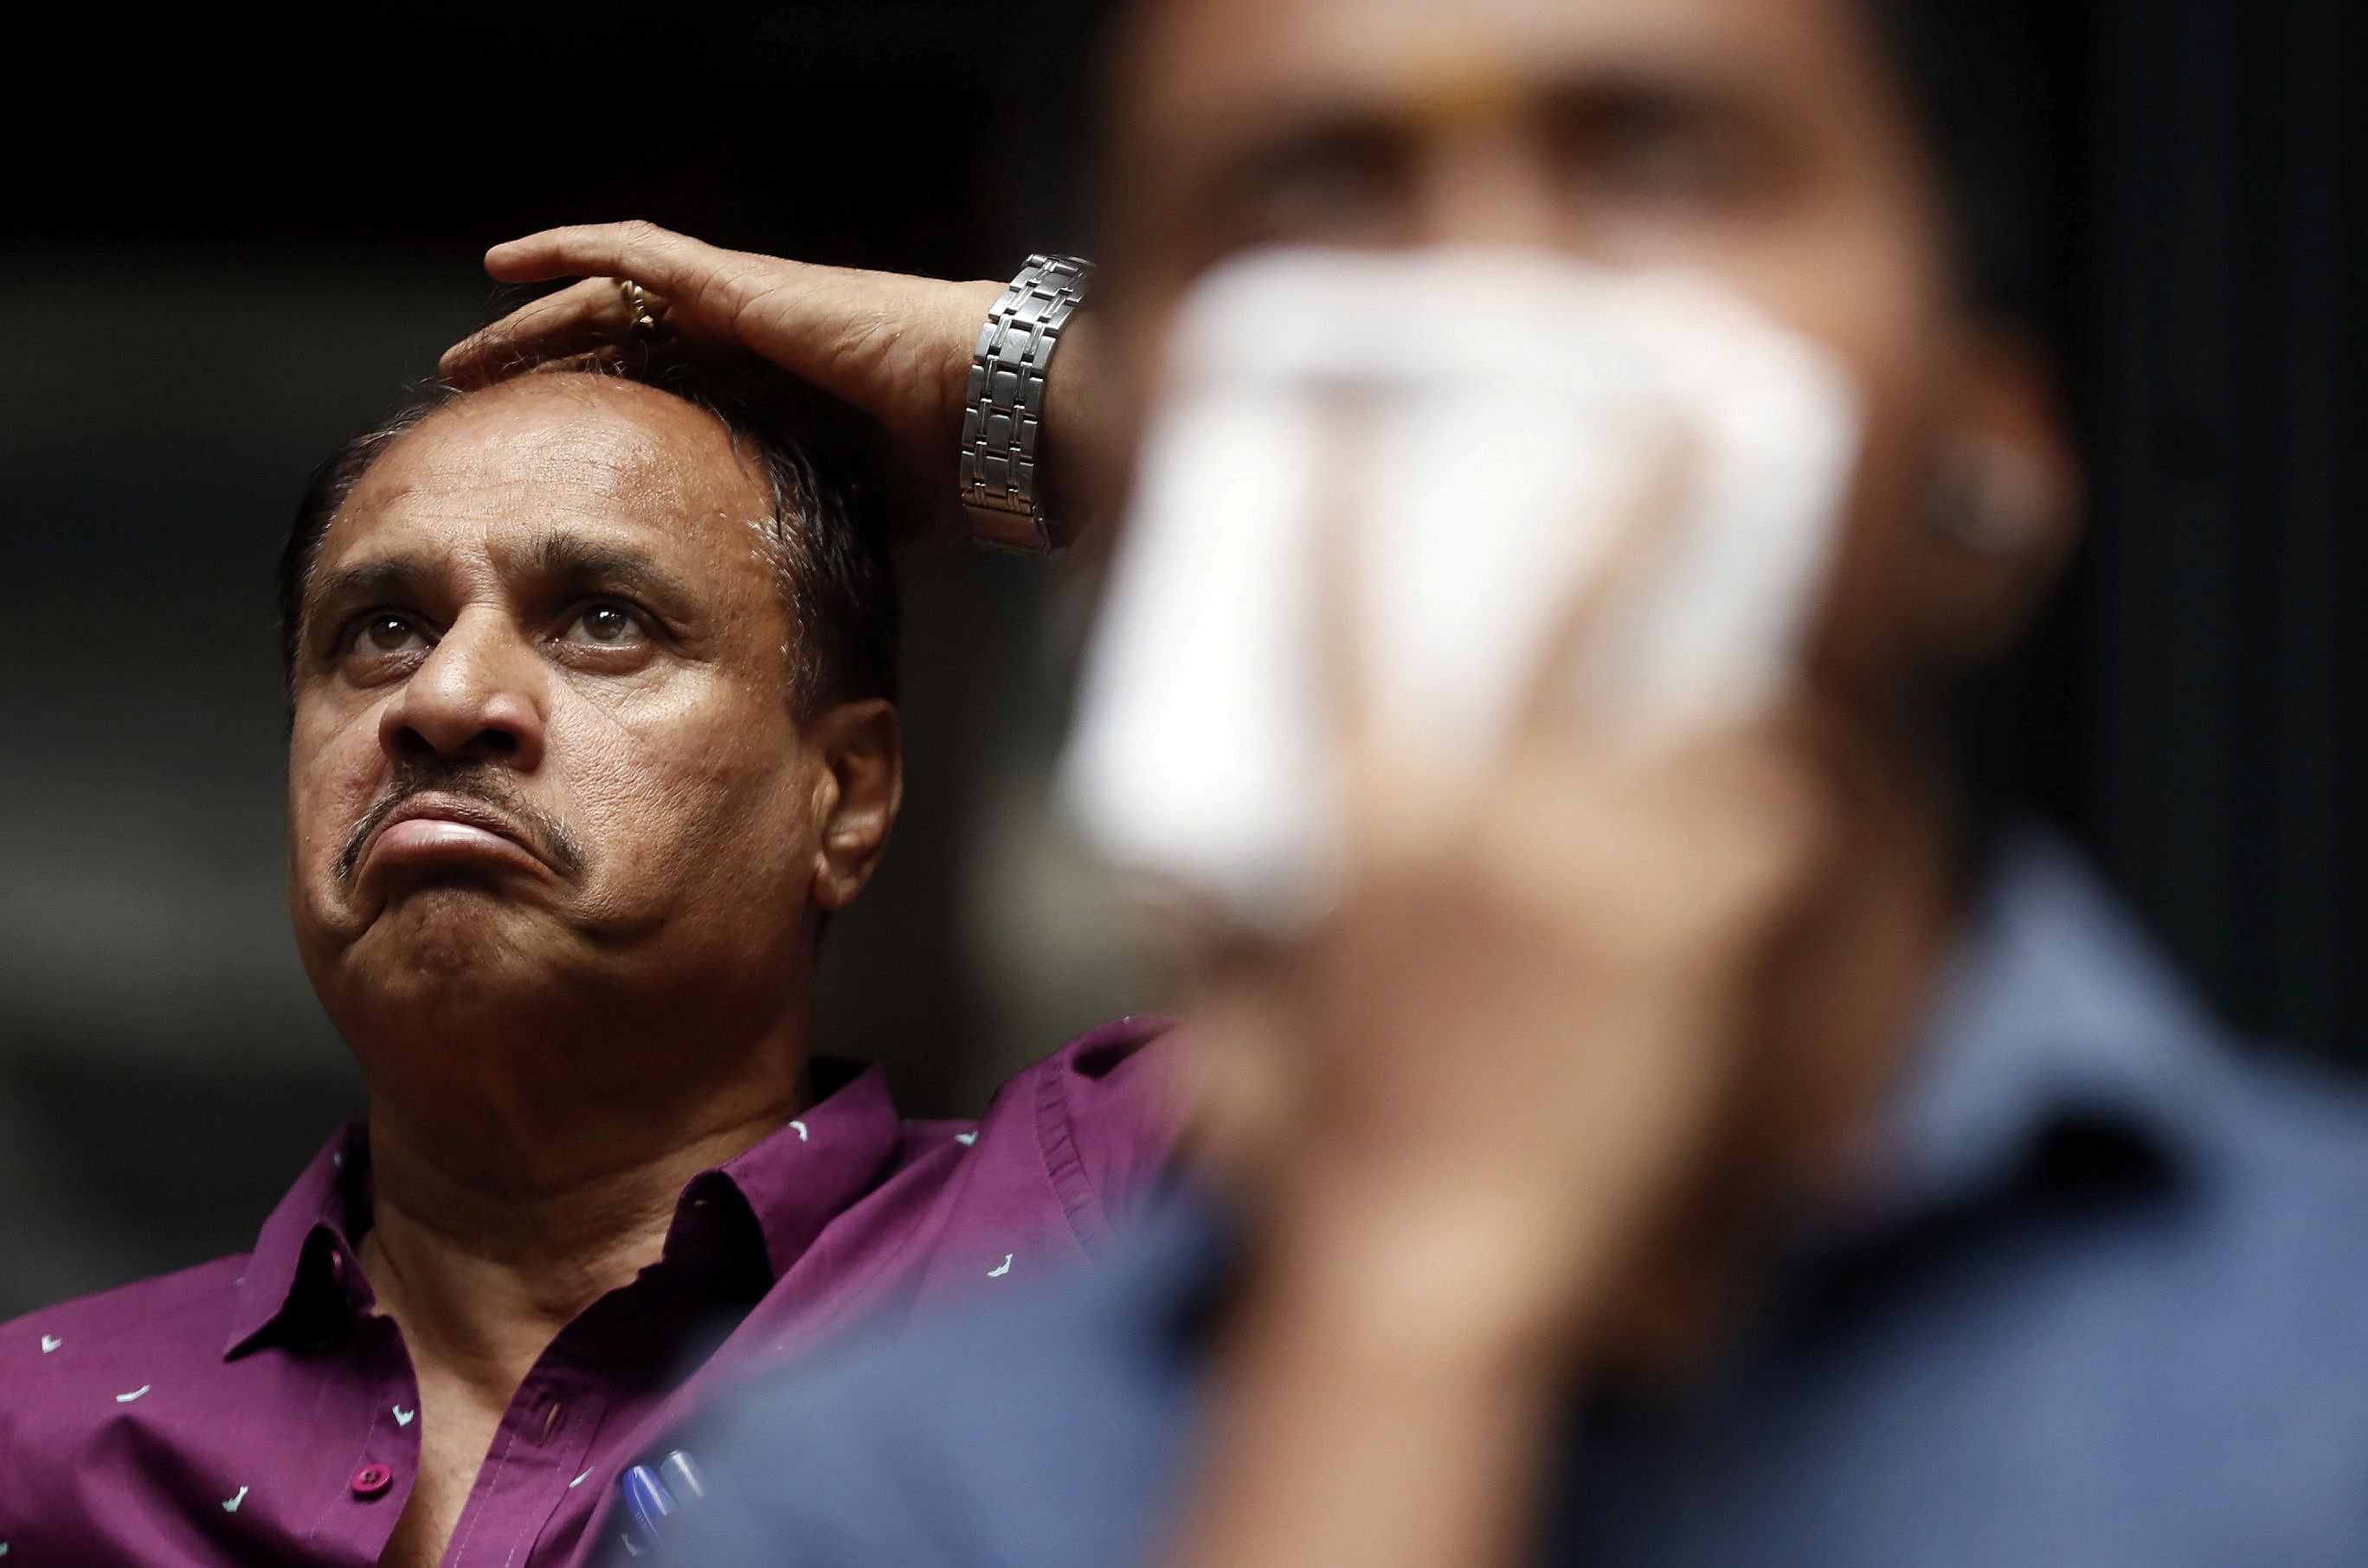 A man reacts as he looks at a screen displaying the Sensex results on the facade of the Bombay Stock Exchange (BSE) building. (Reuters Photo)